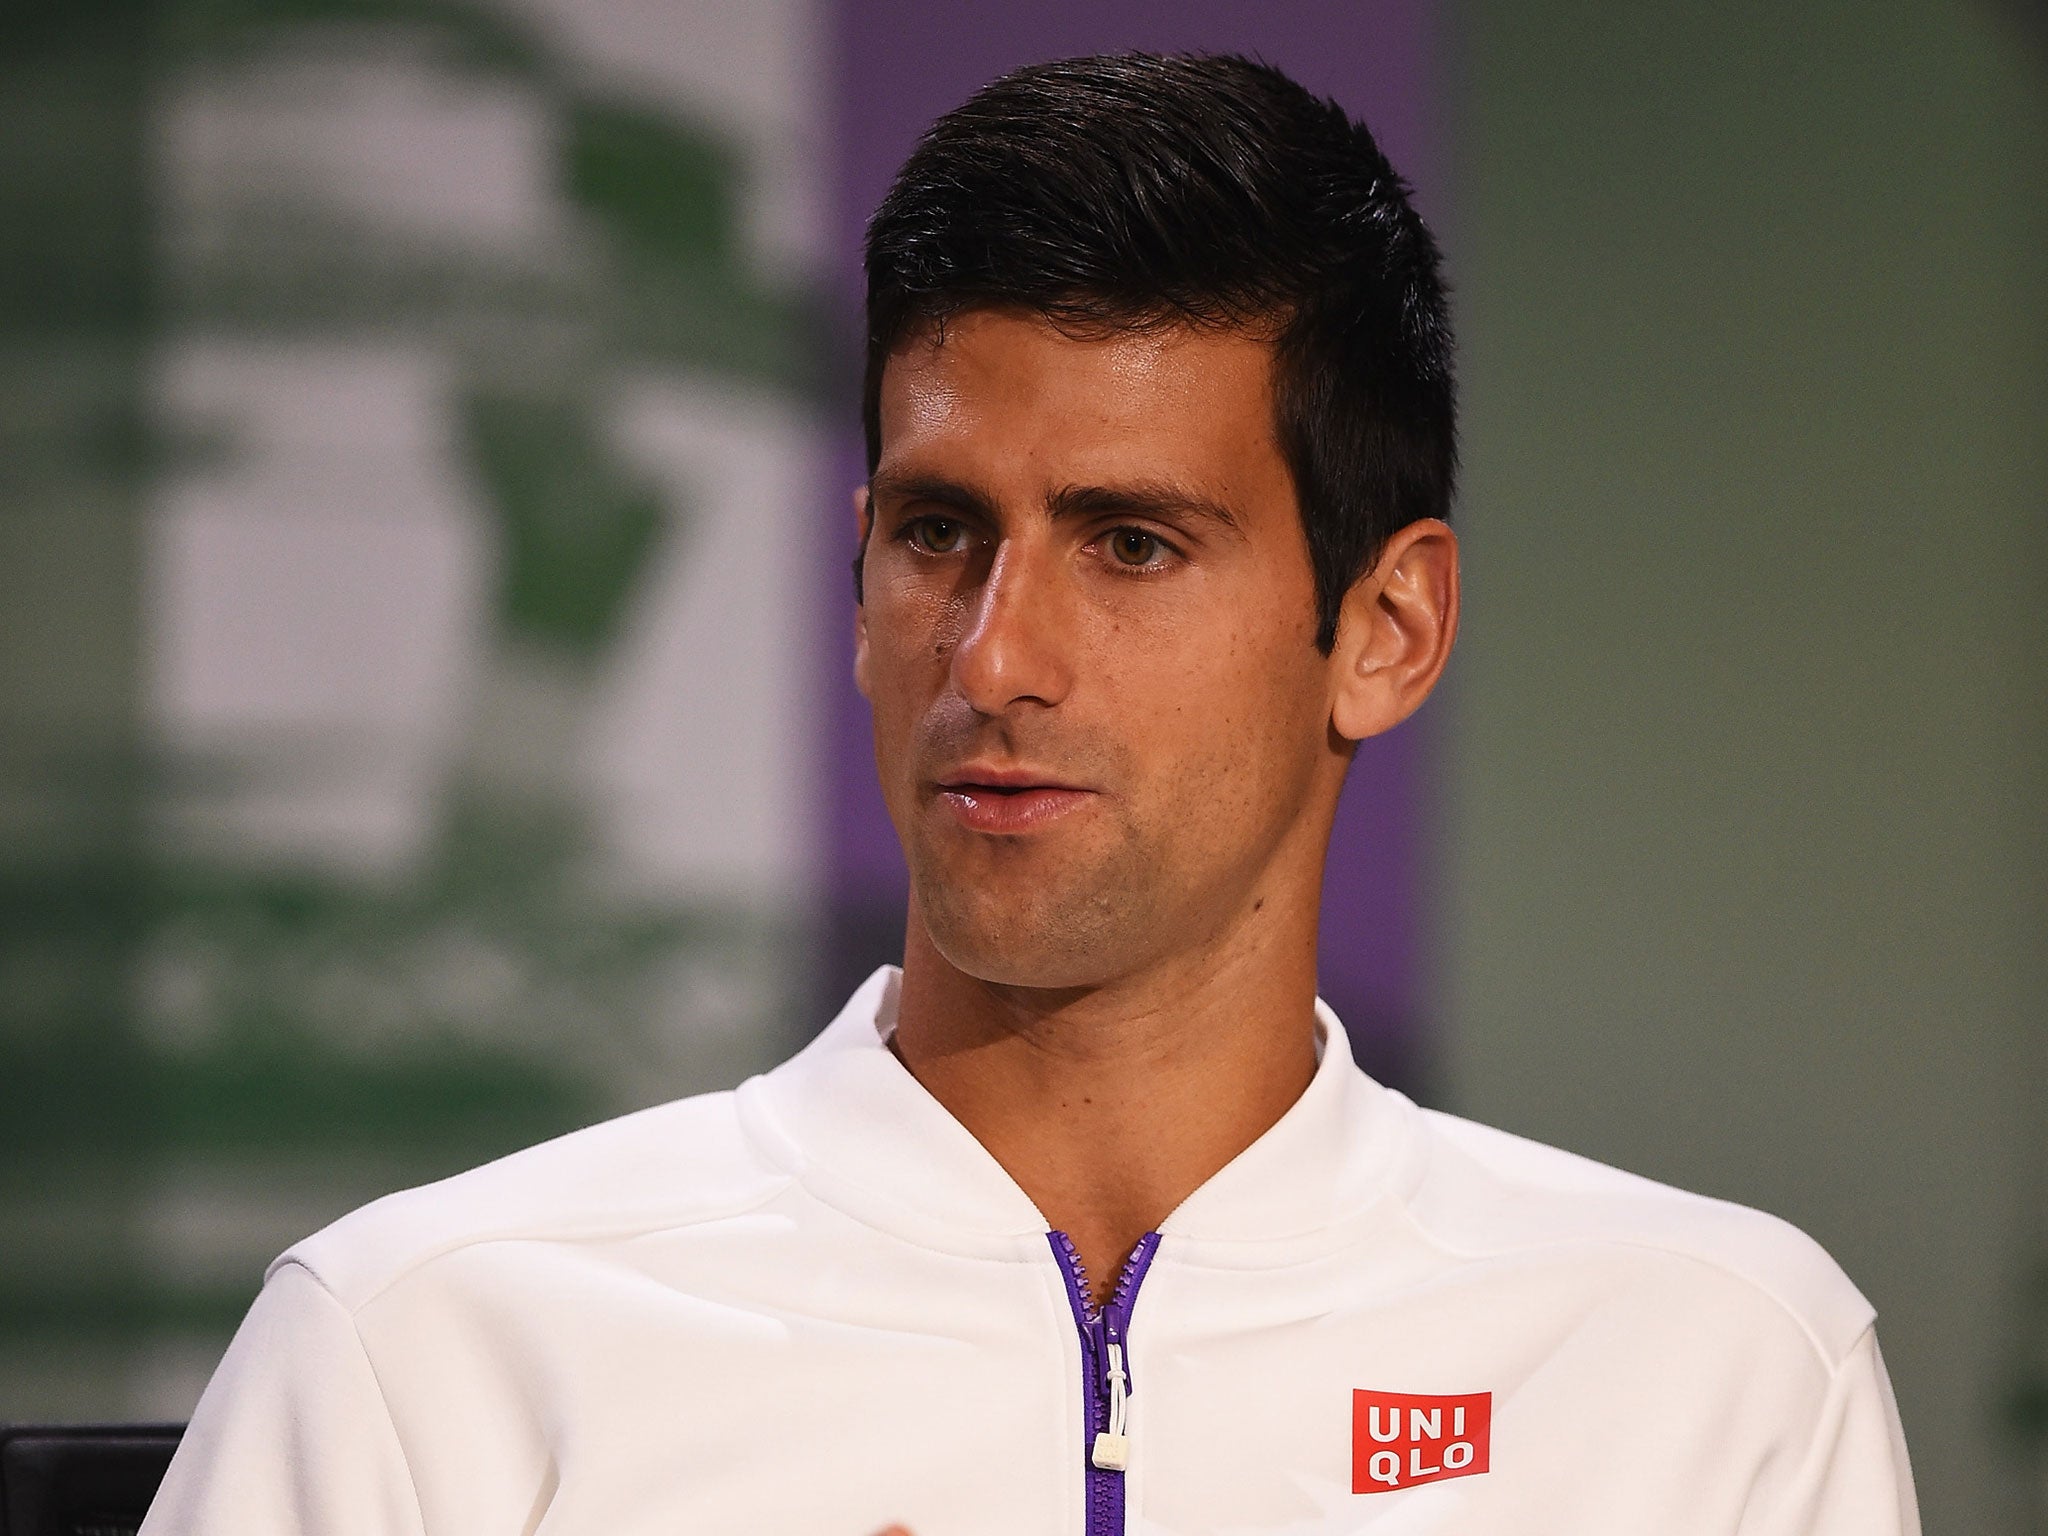 Novak Djokovic has been forced to defend himself and coach Becker from accusations of cheating